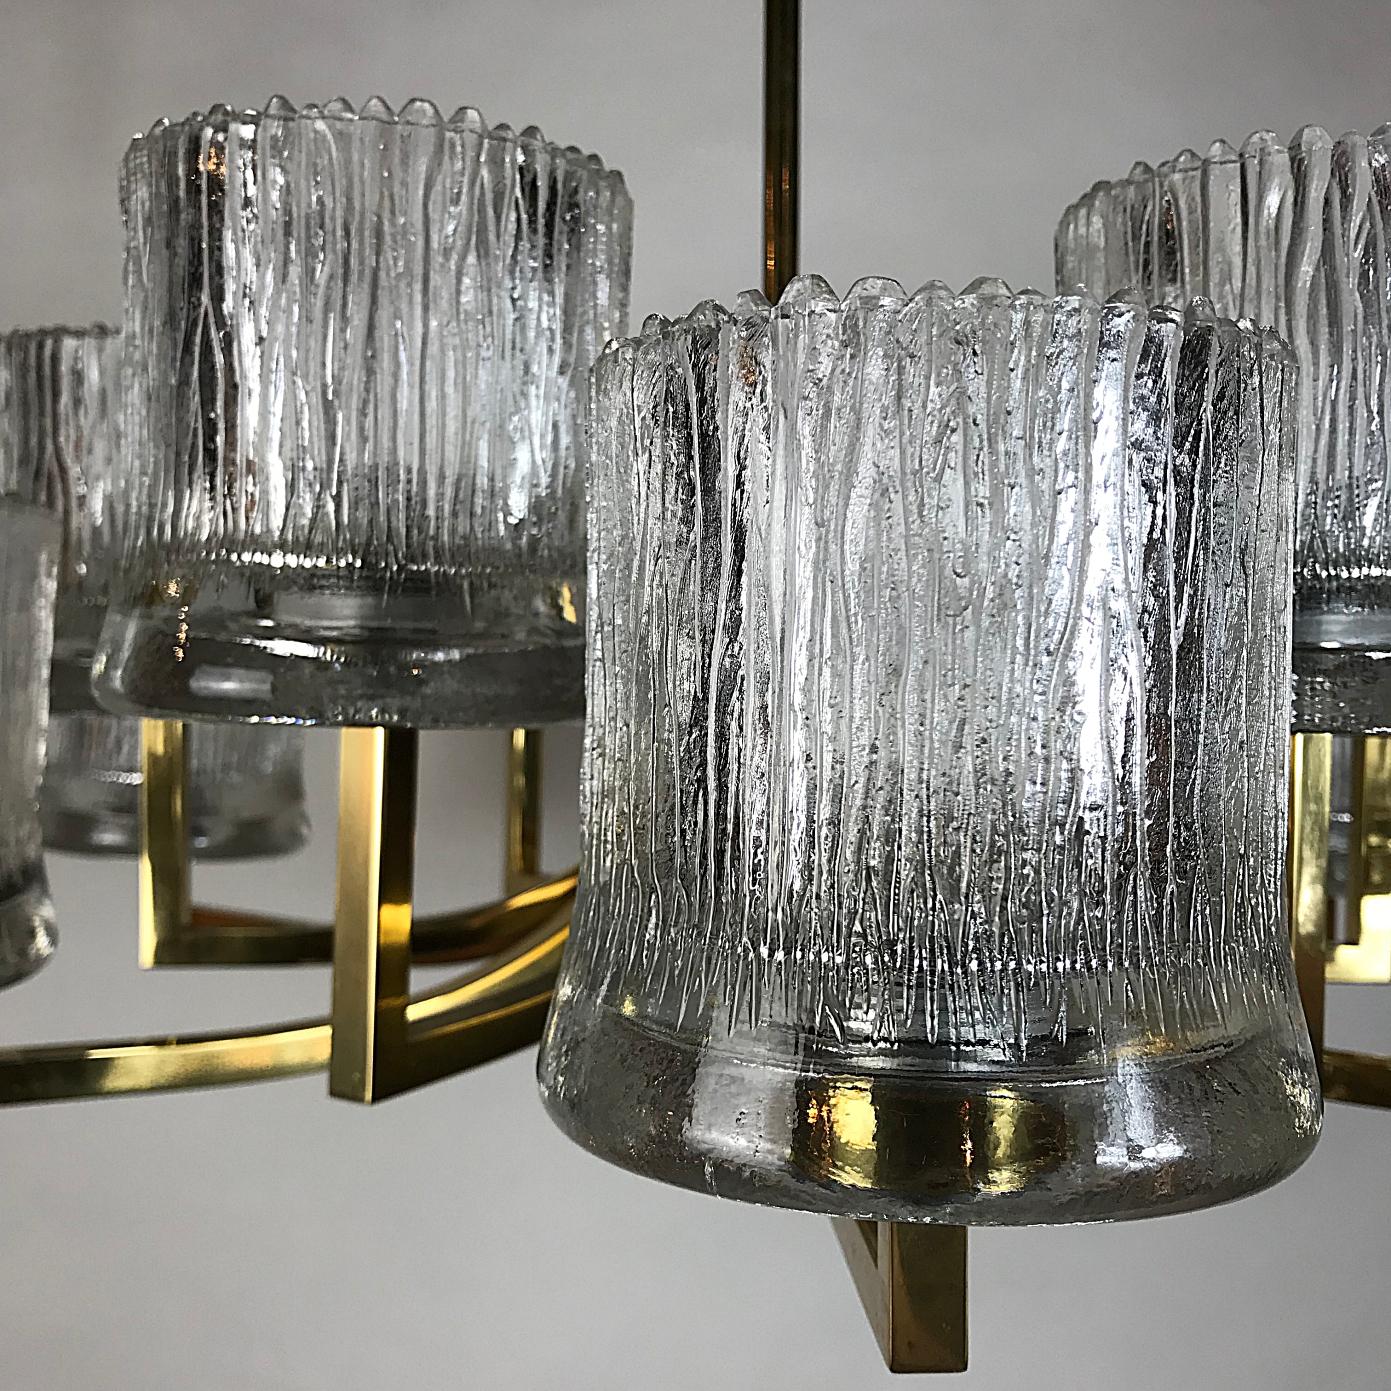 Plated Midcentury Modern Orrefors Spider Chandelier Ice Glass and Brass, 1950s, Sweden